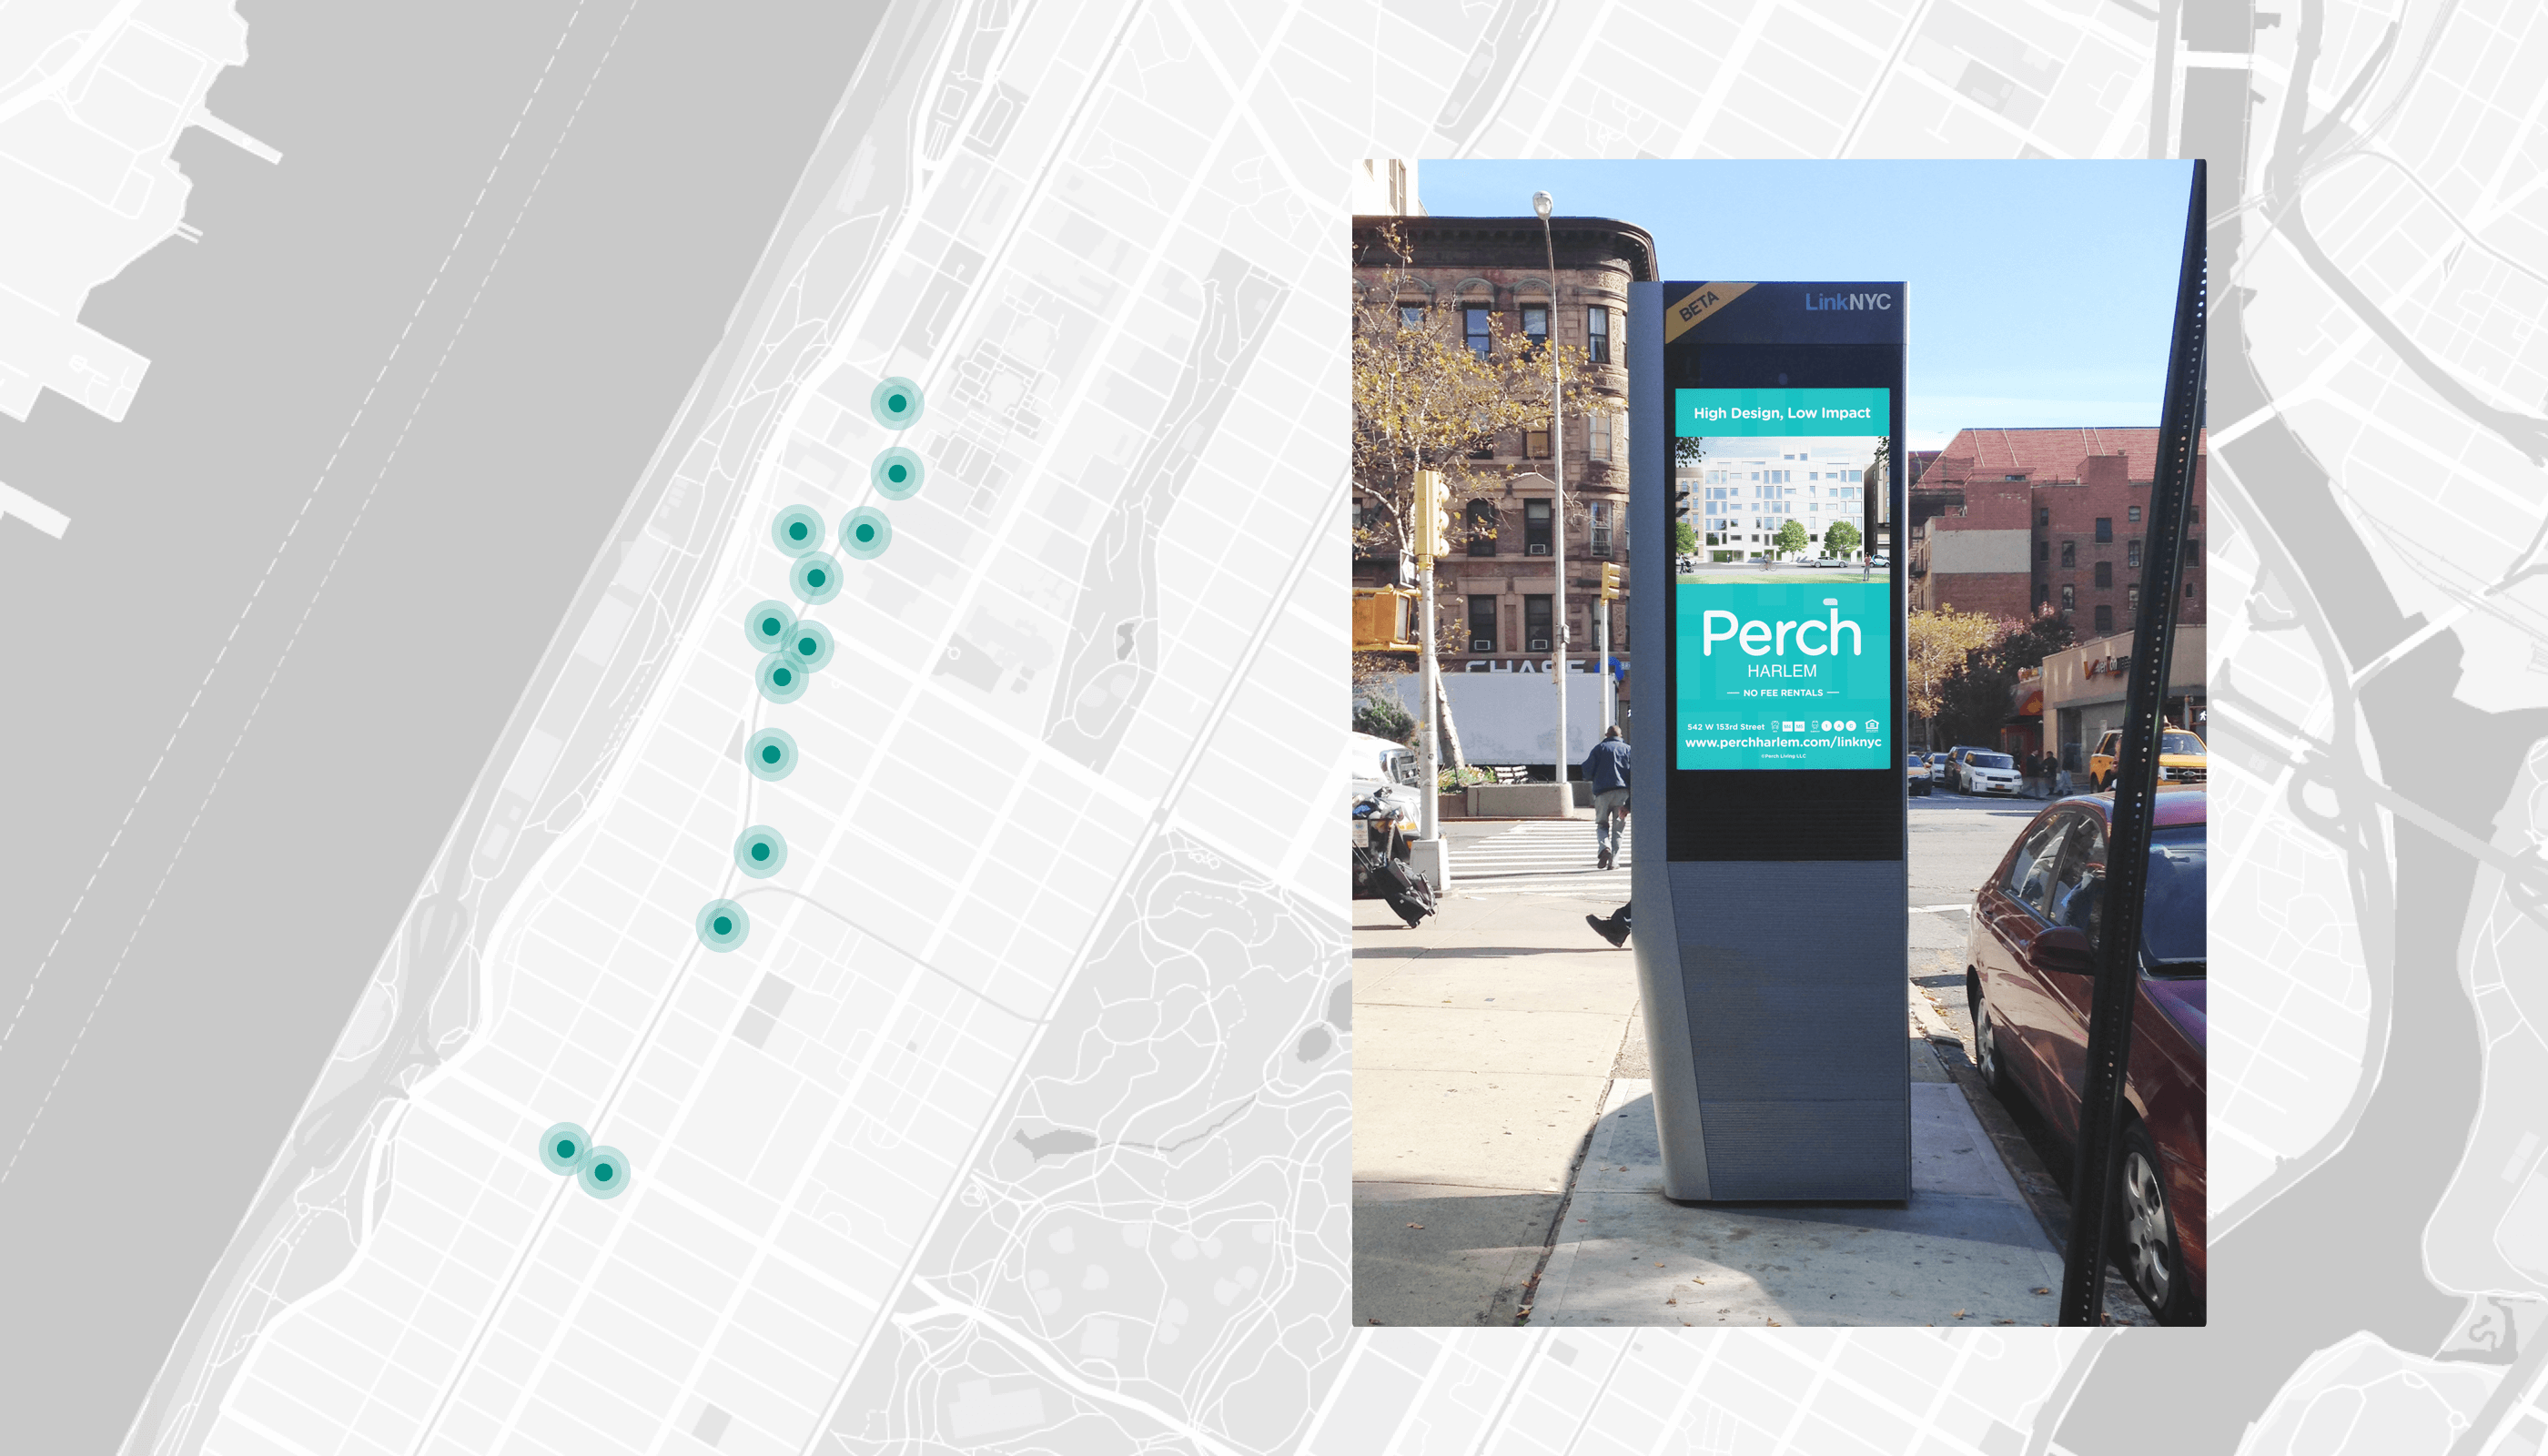 Perch Harlem display campaign map by ATTCK